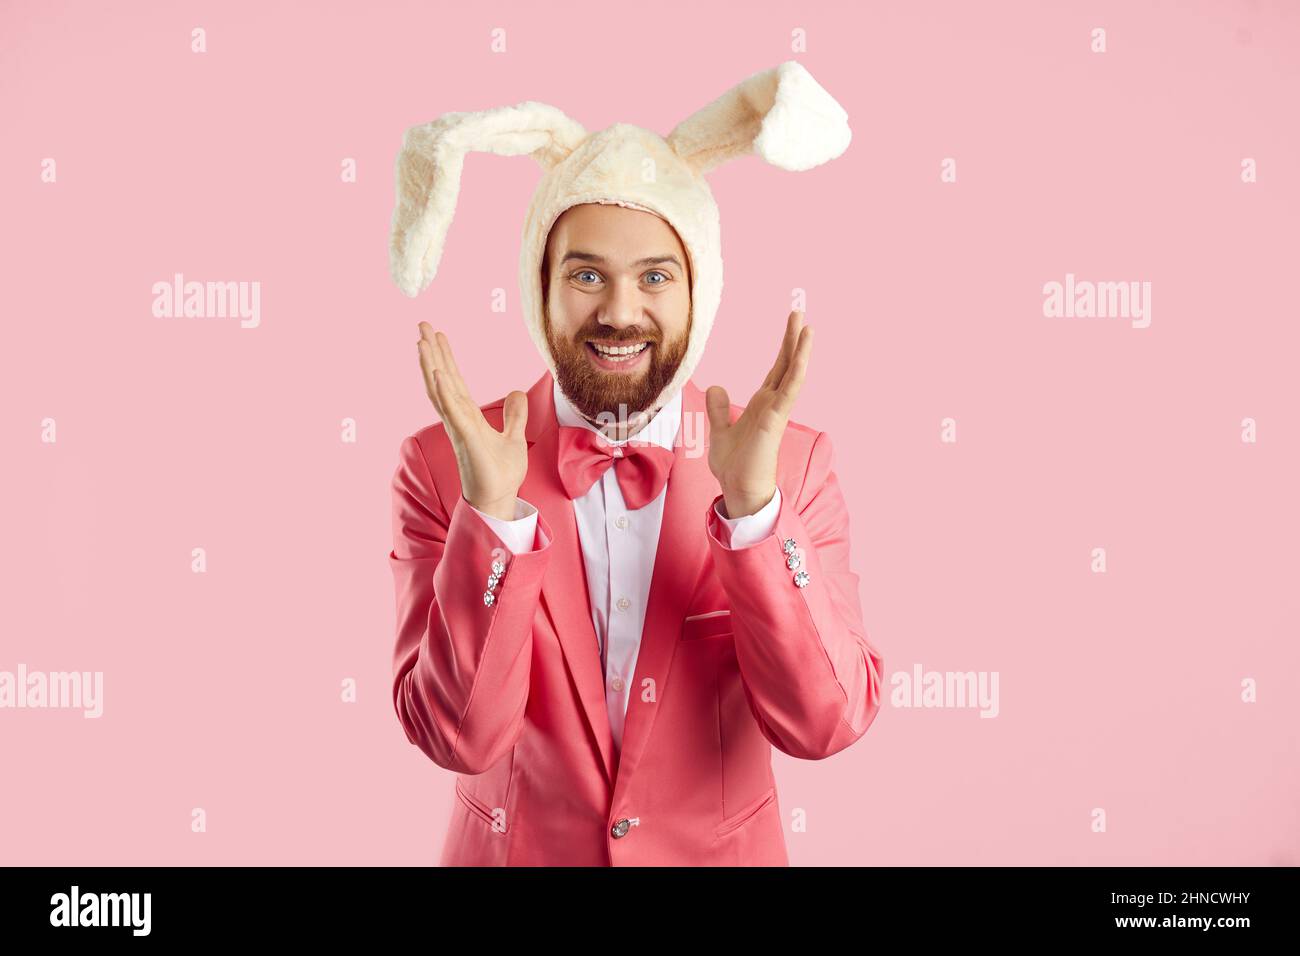 Positive funny man in soft white hat with ears of rabbit who is sincerely happy on pink background. Stock Photo